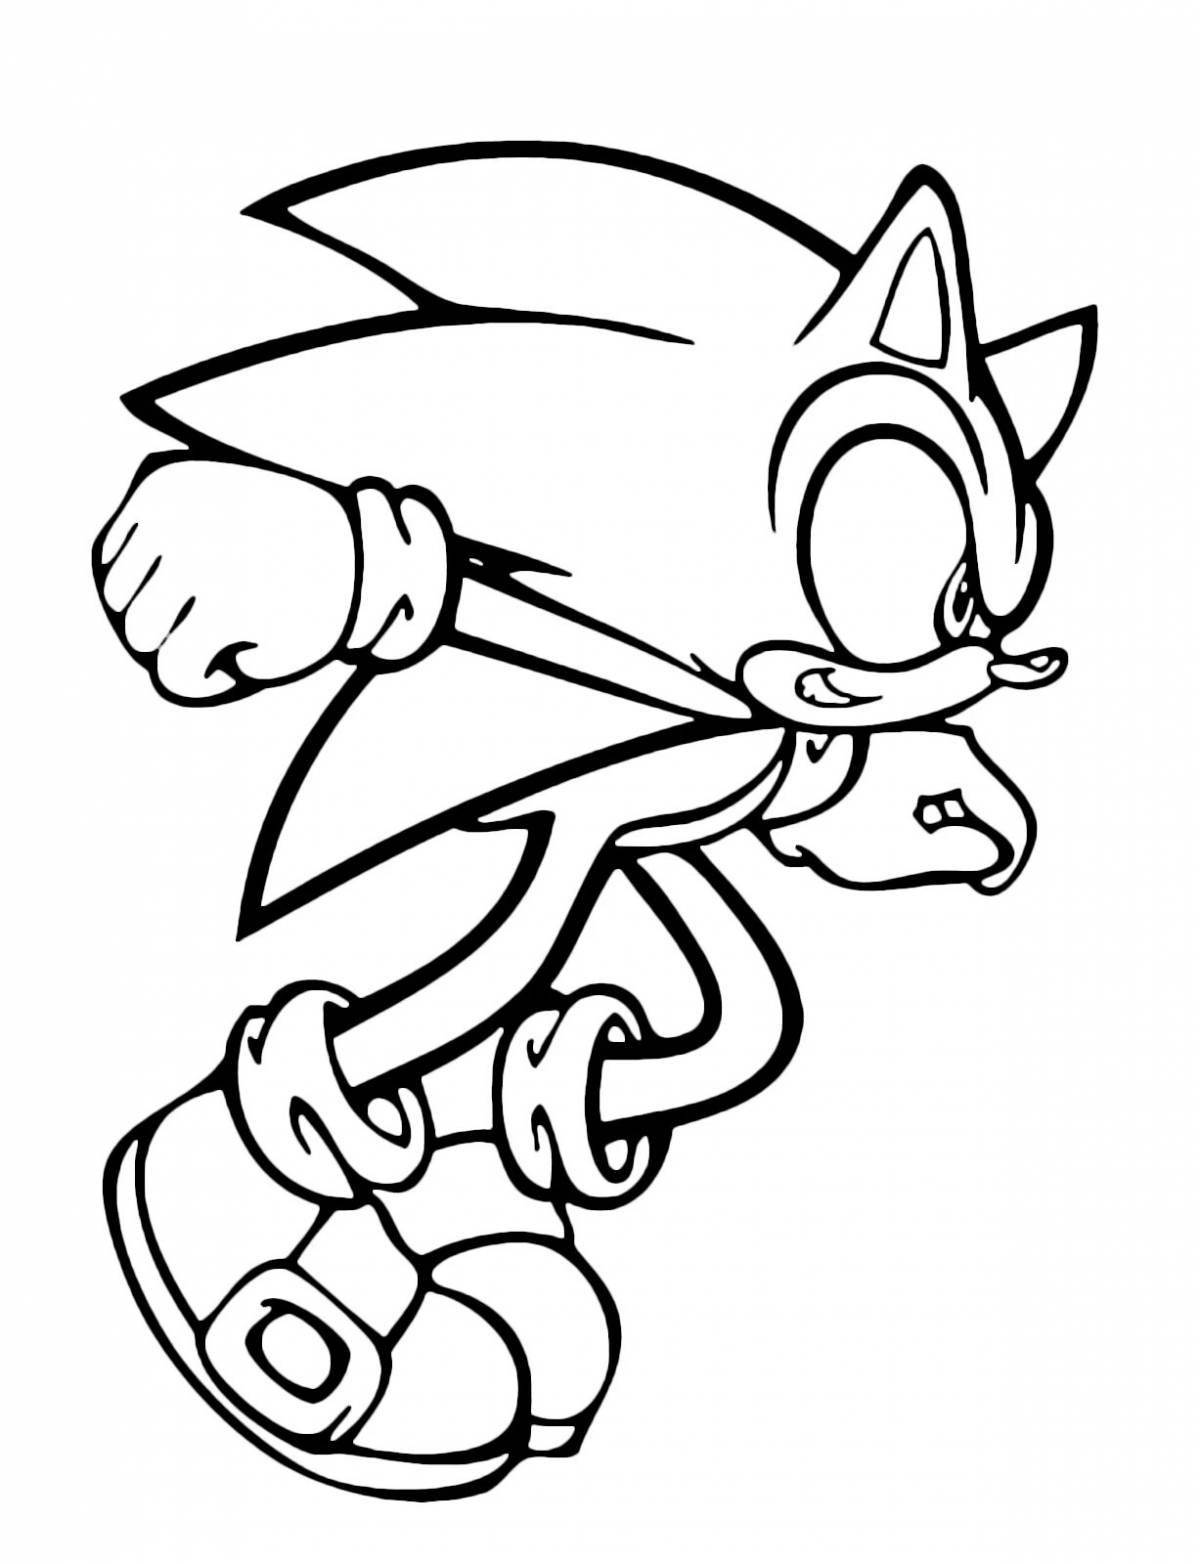 Sonic virus awesome coloring book